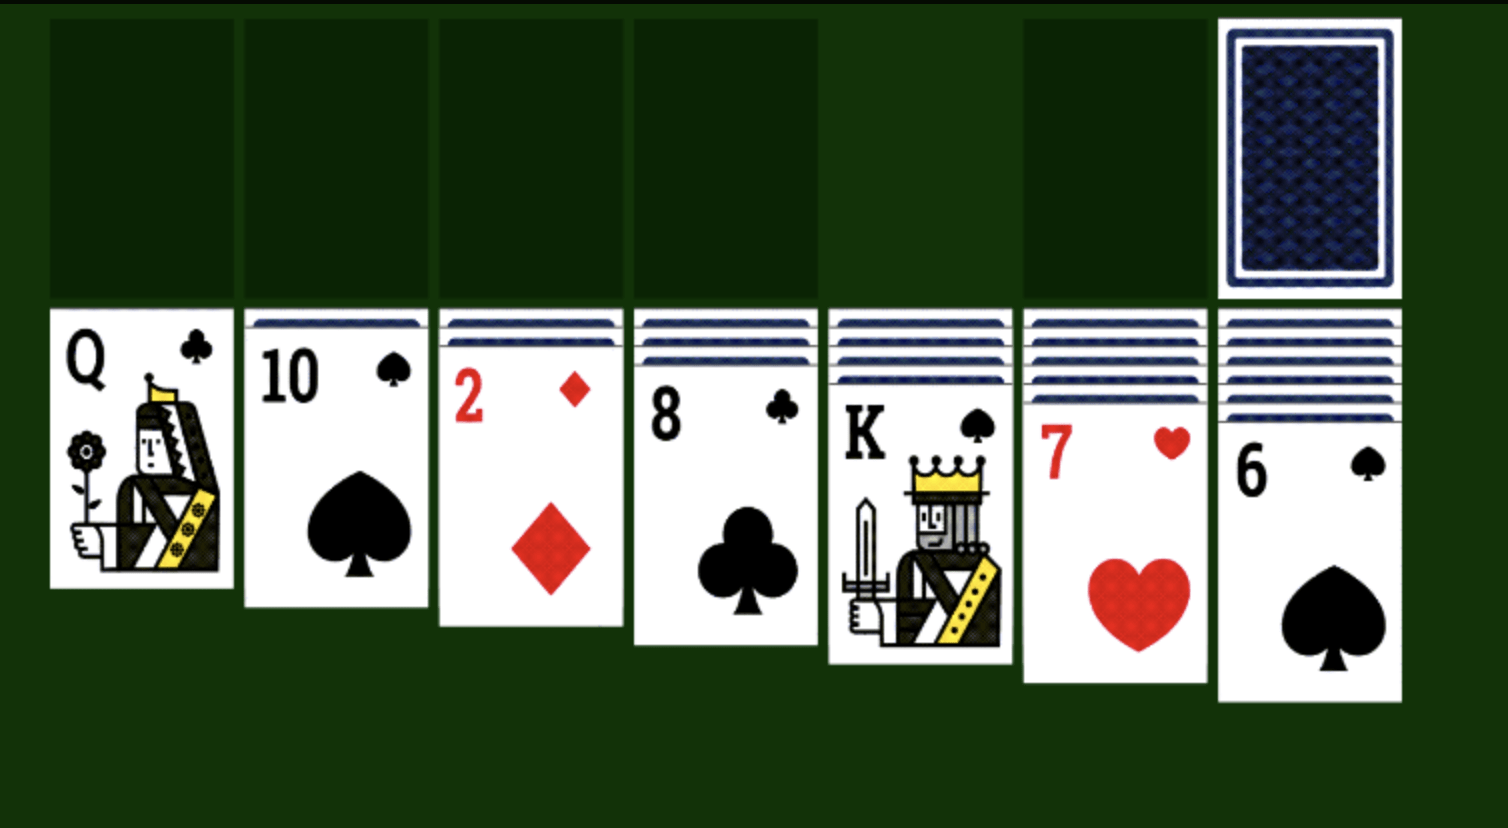 Play classic Solitaire online no fuss, no hassle, no need to download app!